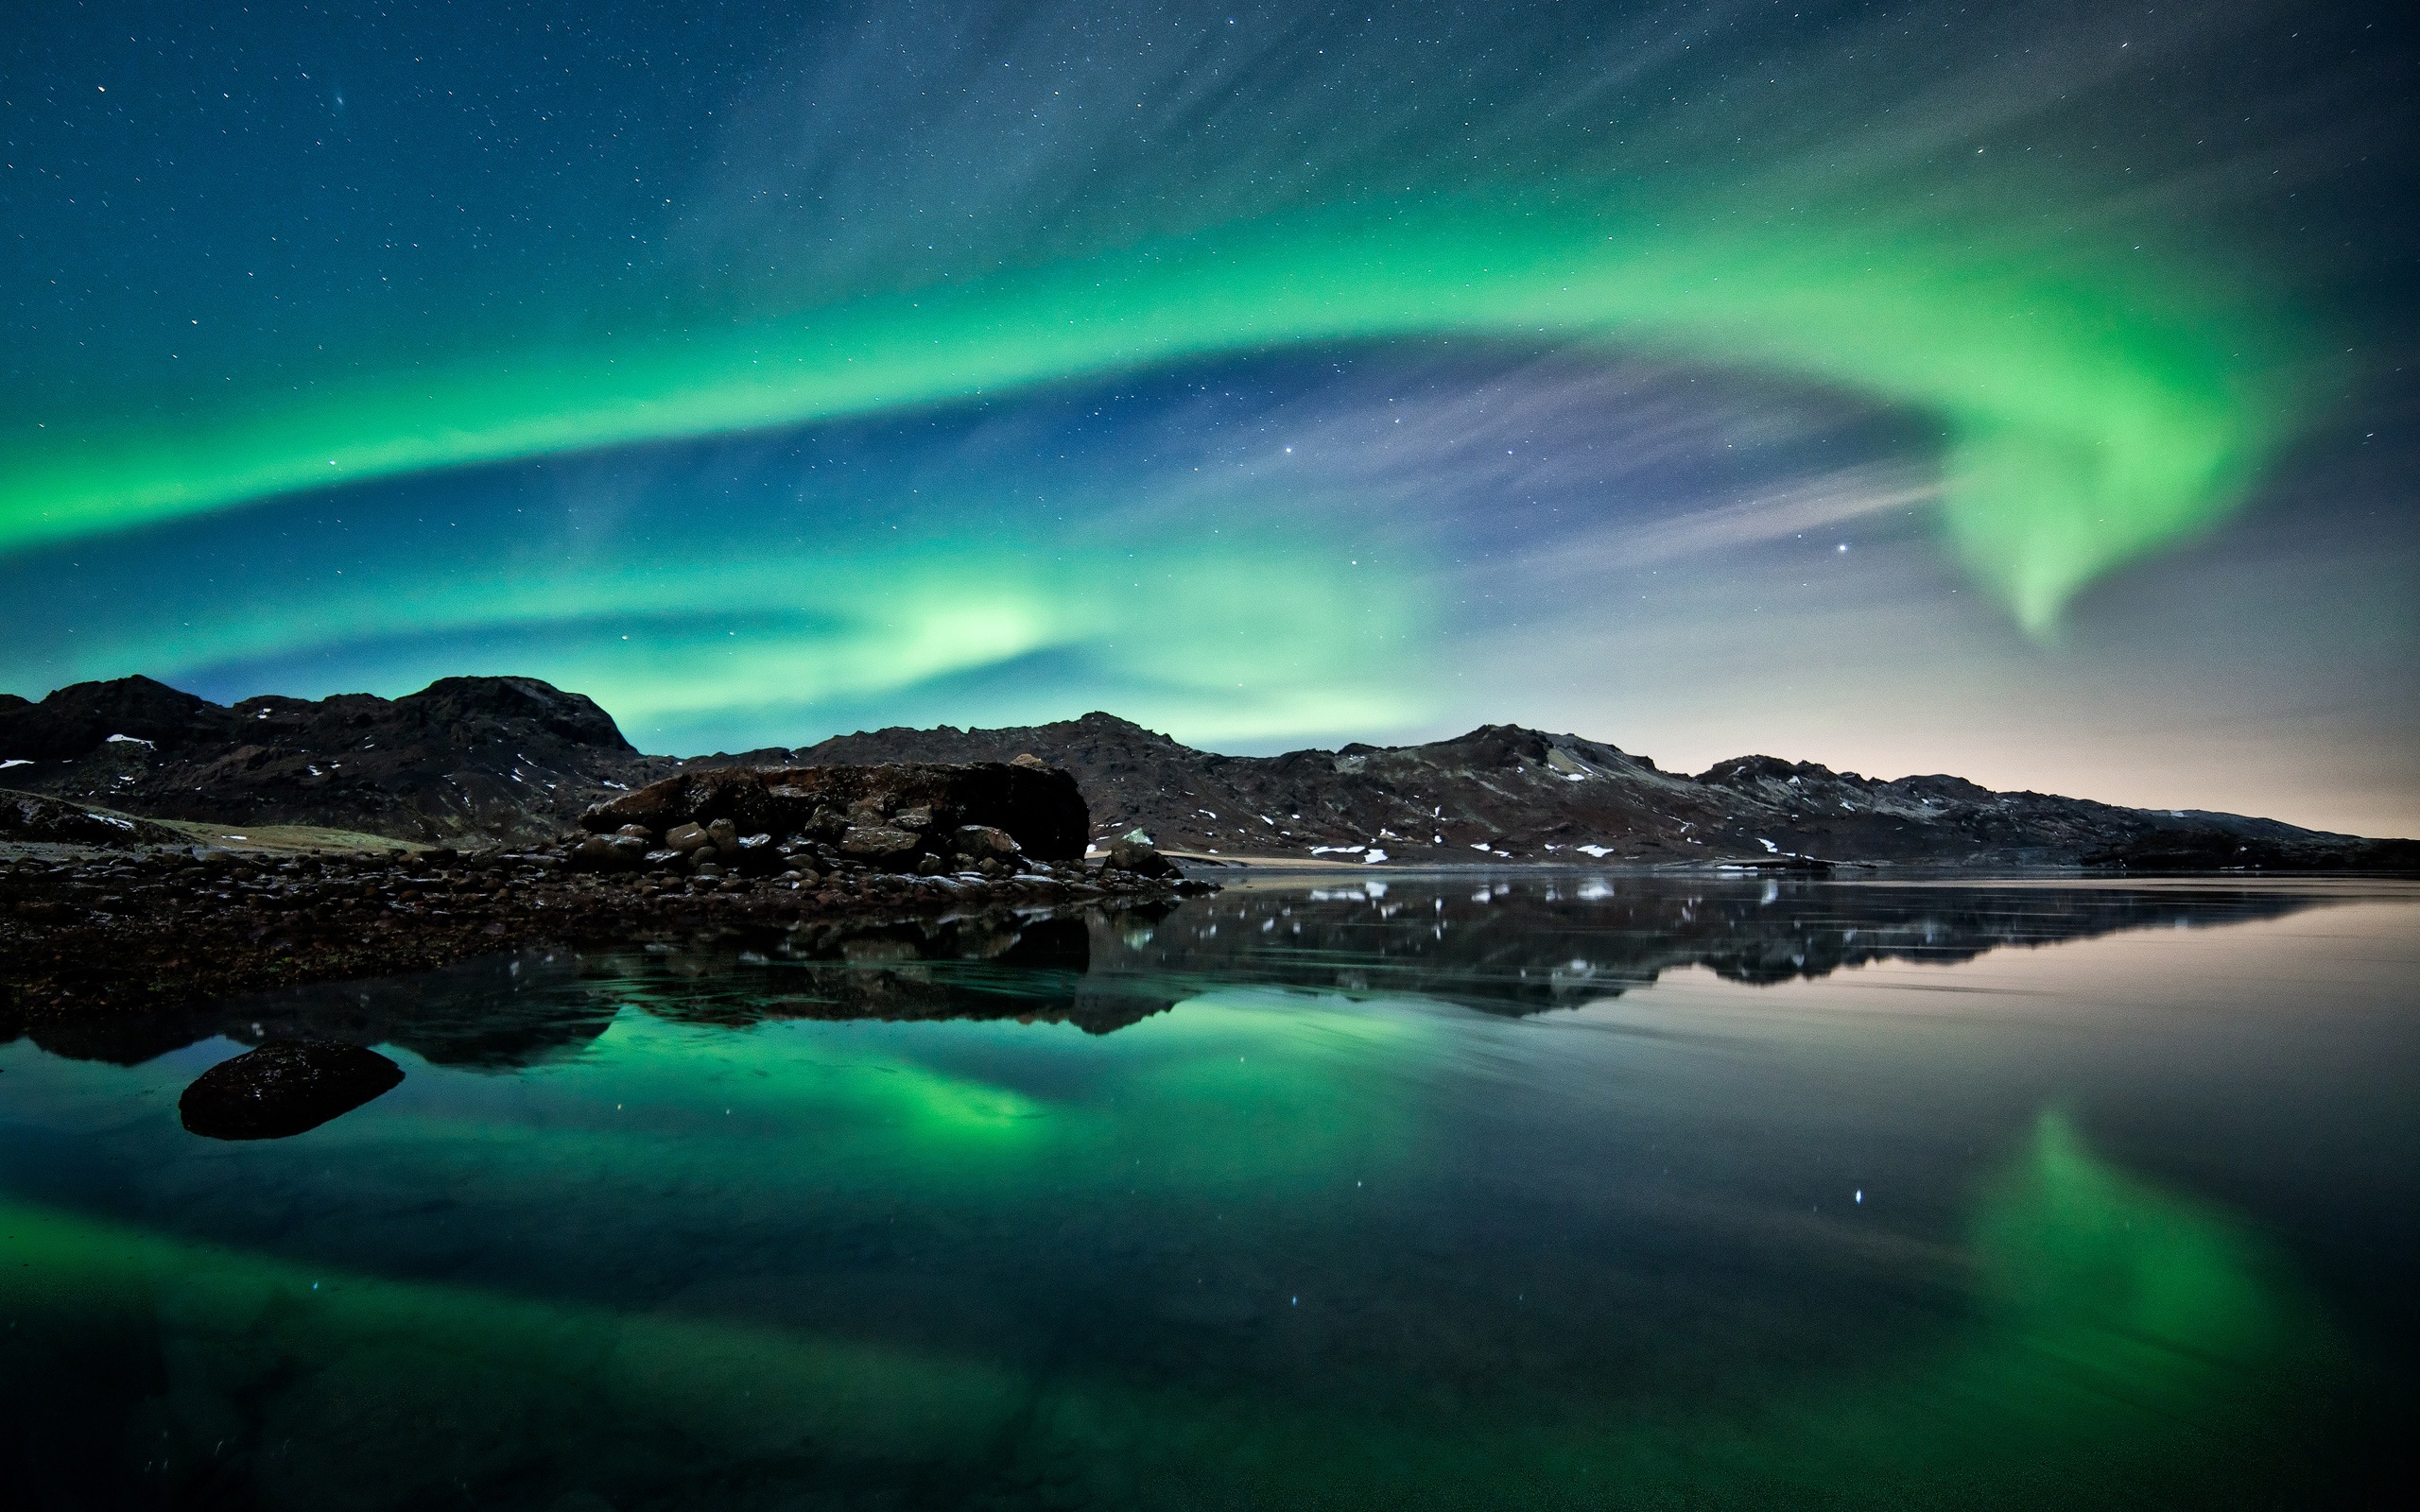 Natural wonders of the Northern Lights HD Wallpaper (1) #1 - 2560x1600